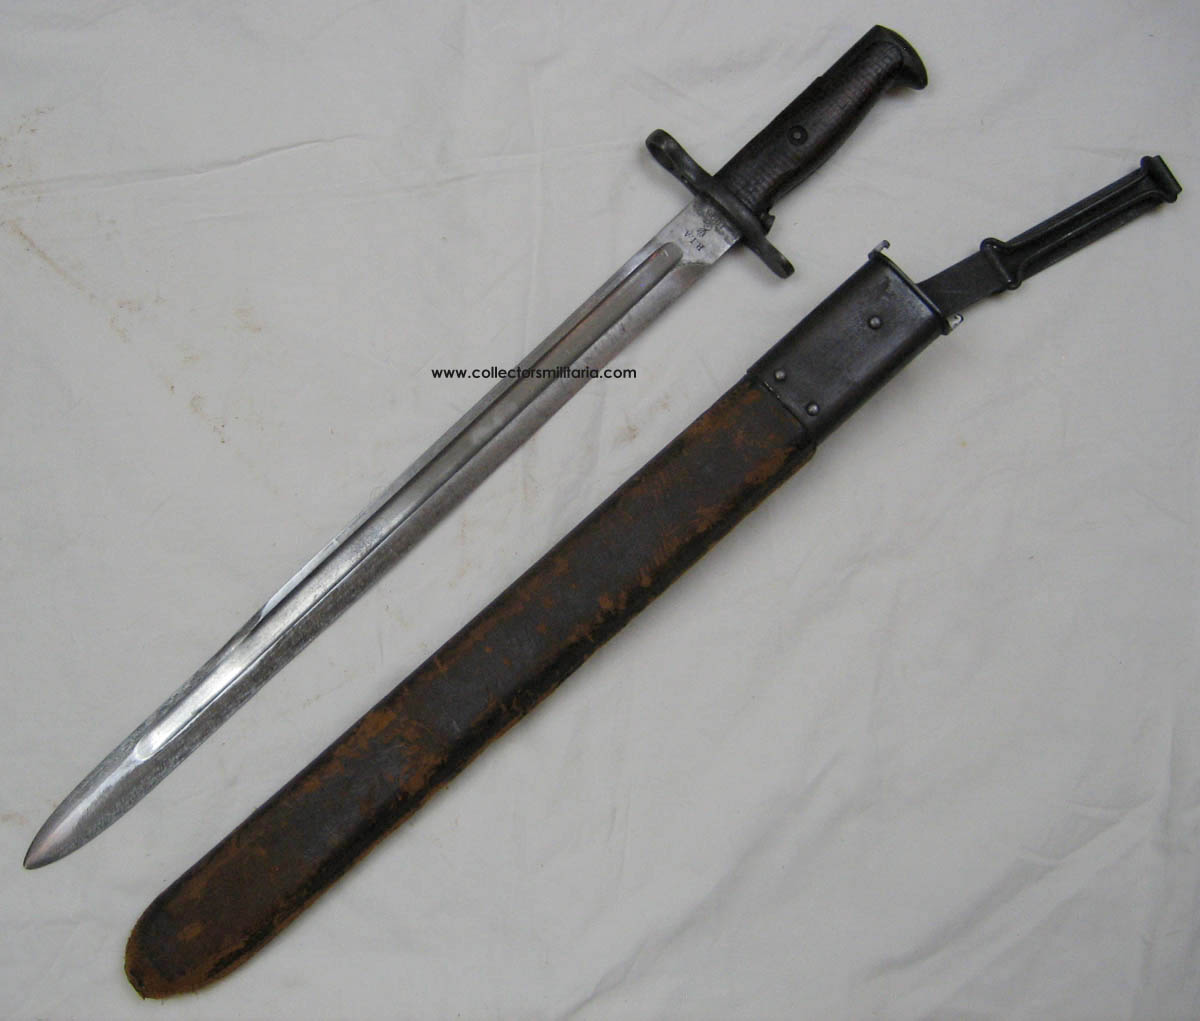 This is a scarce early US M1905 bayonet for the 1903 Springfield rifle. 